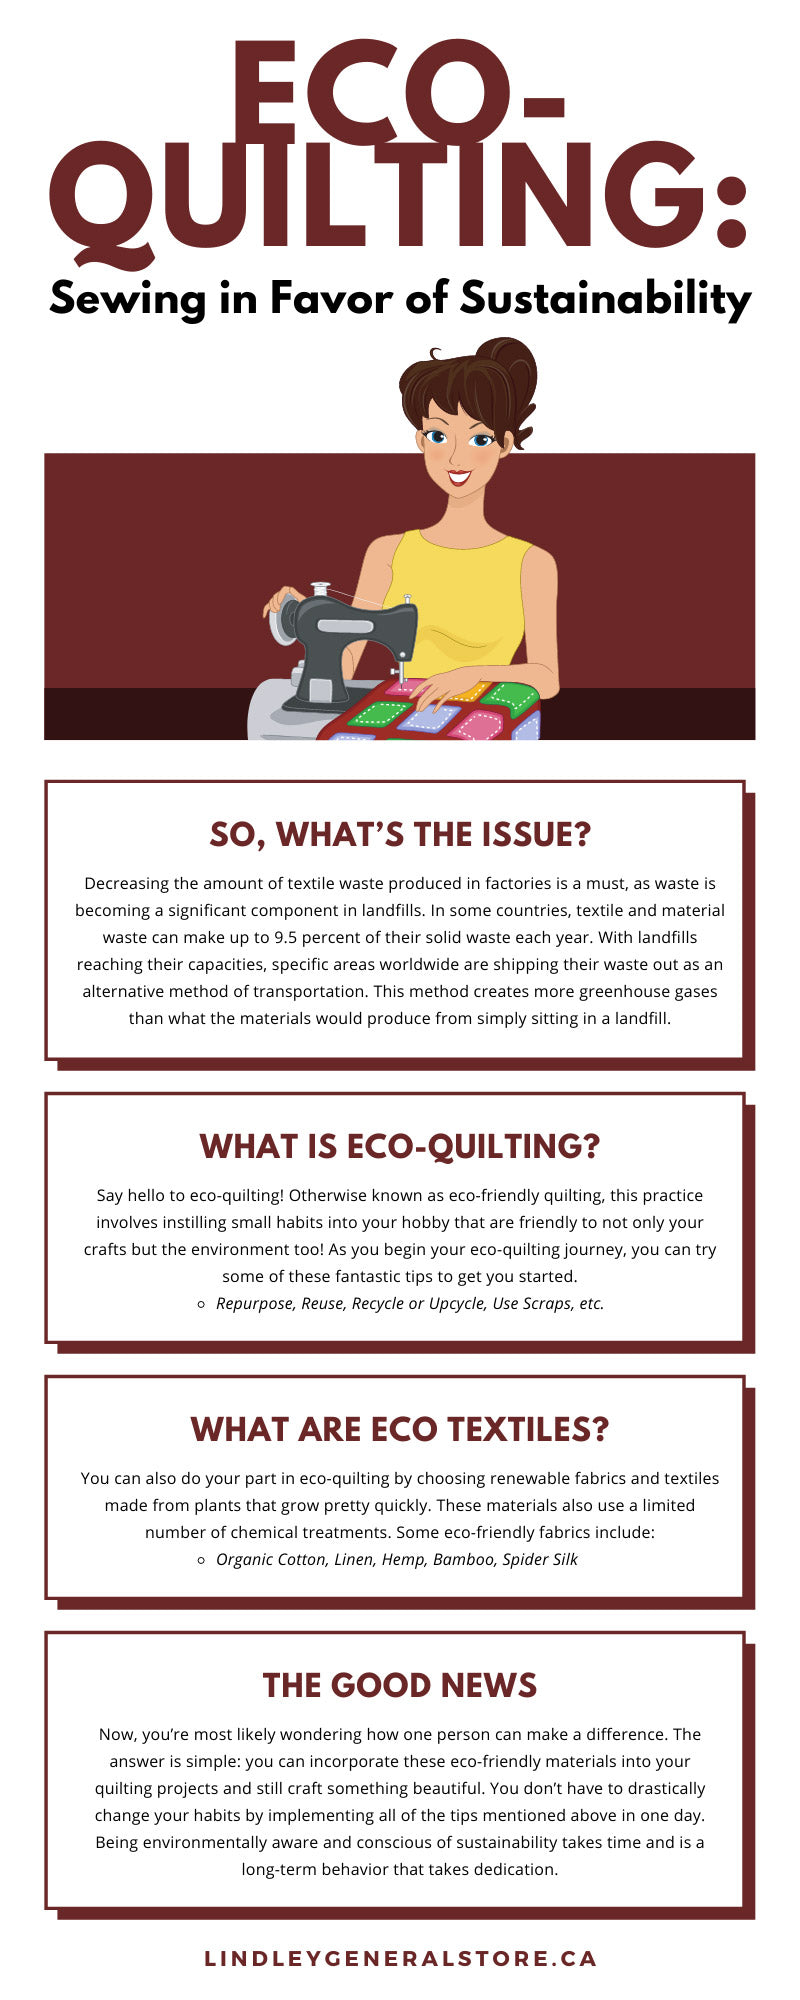 Eco-Quilting: Sewing in Favor of Sustainability